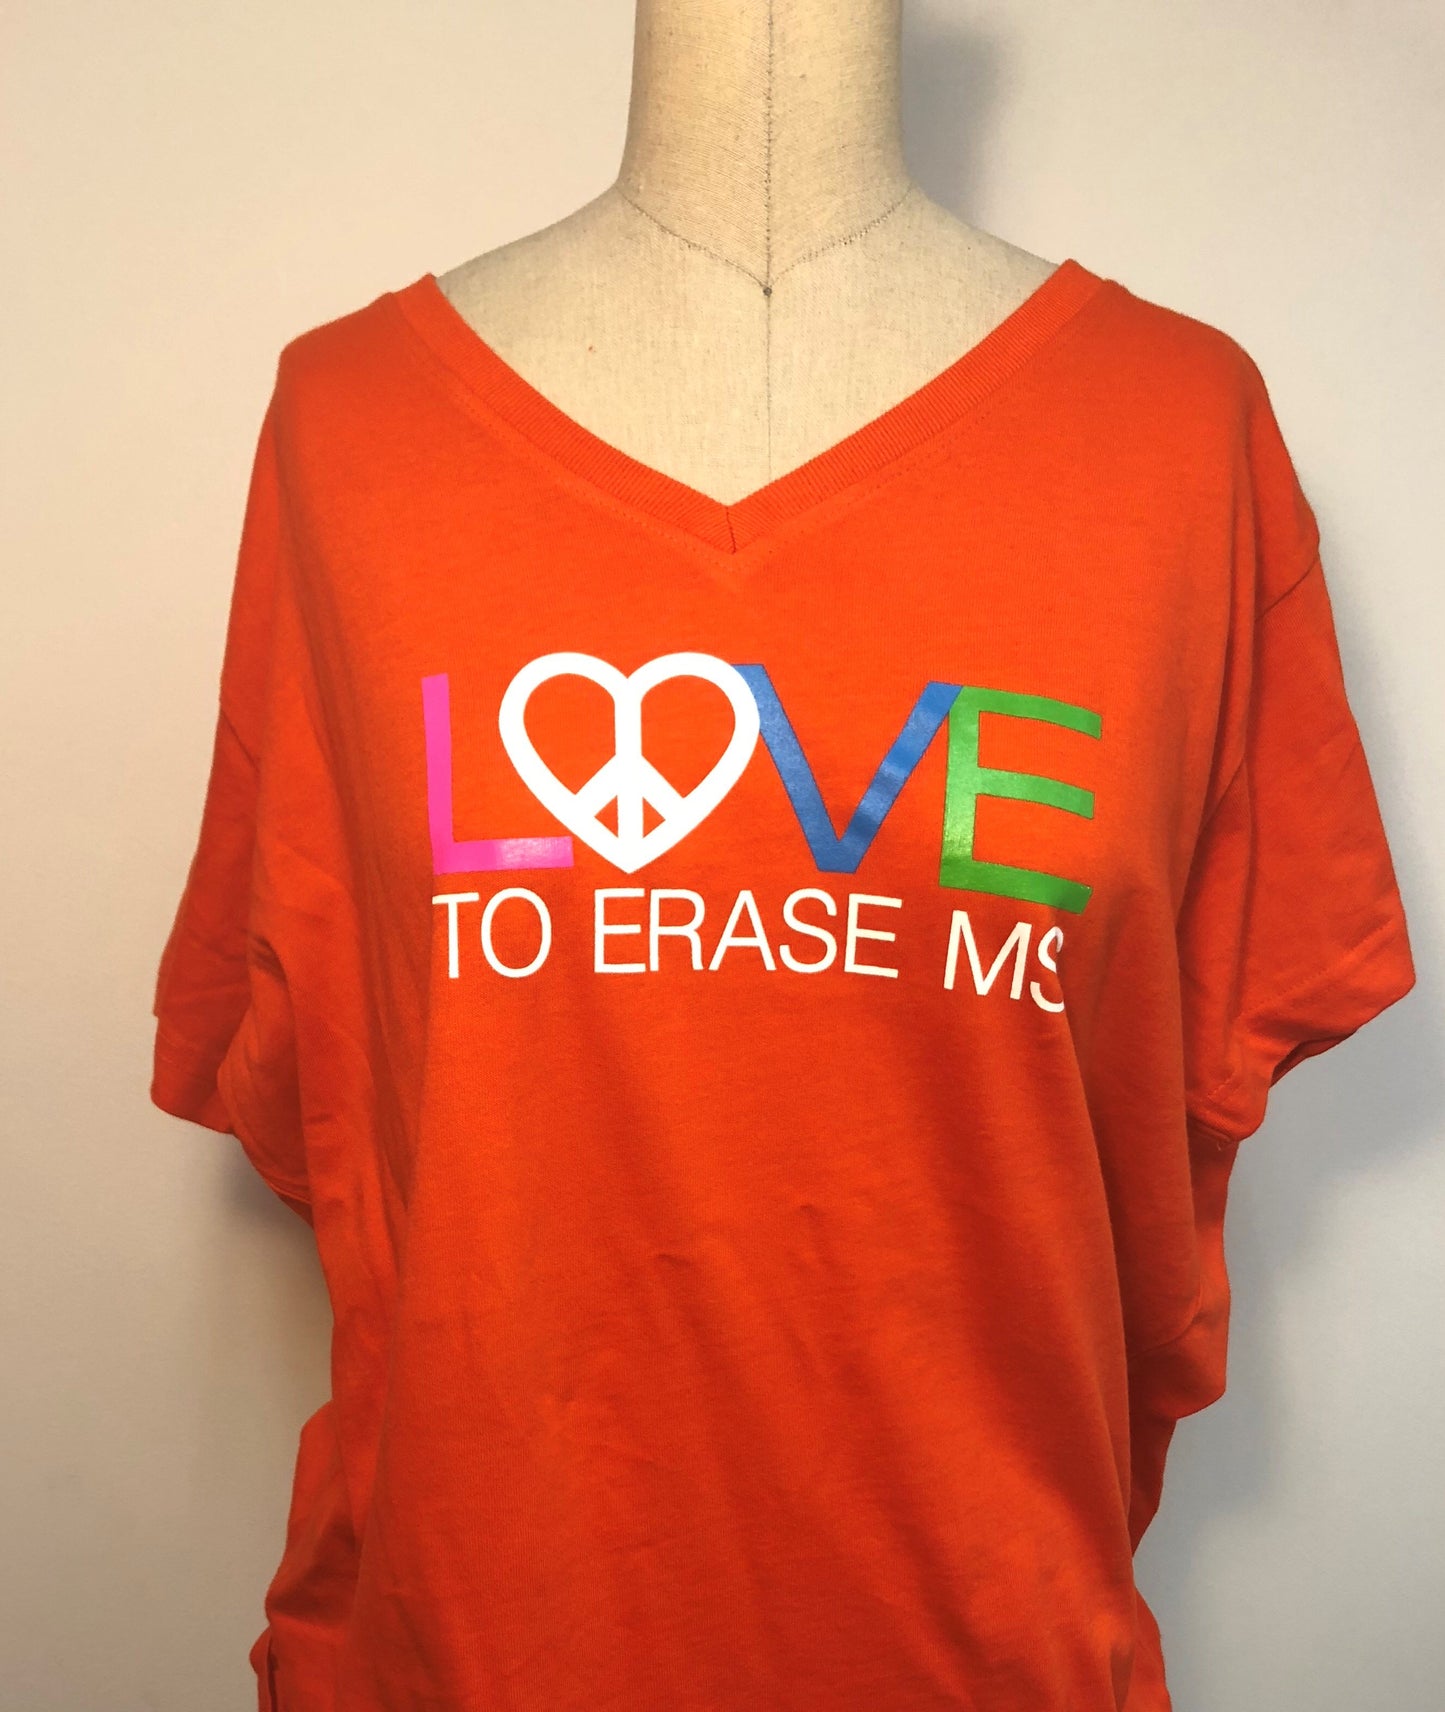 2018 Women's Race to Erase MS Campaign Tee